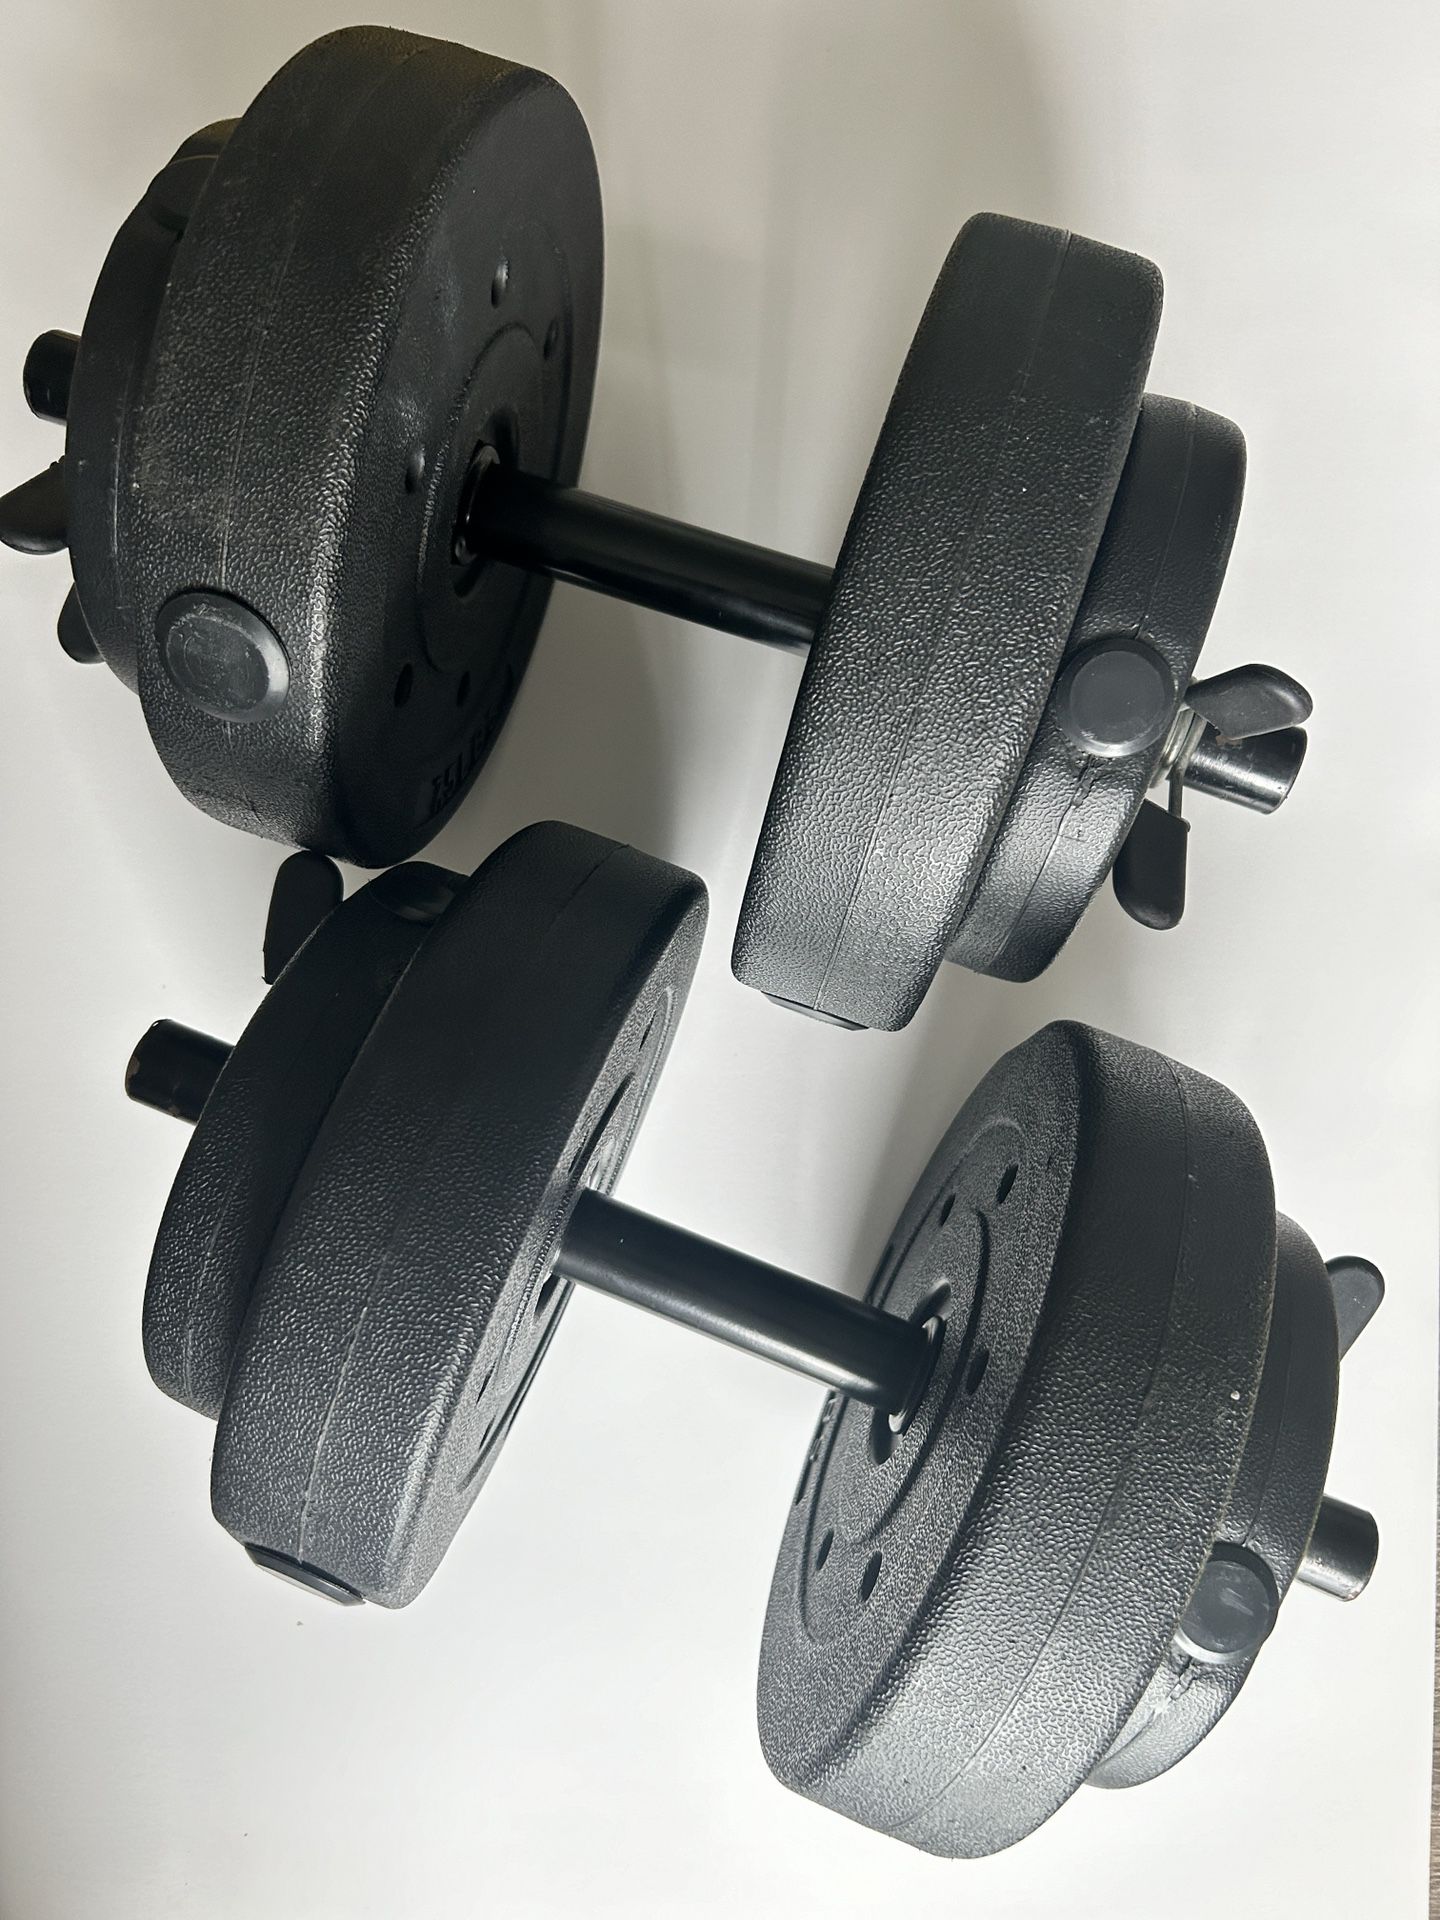 4(four) Adjustable Dumbbells, Set Of 2(two) 40 Pound Vinyl Dumbbell with Adjustable Weights,Lifting Dumbbells 